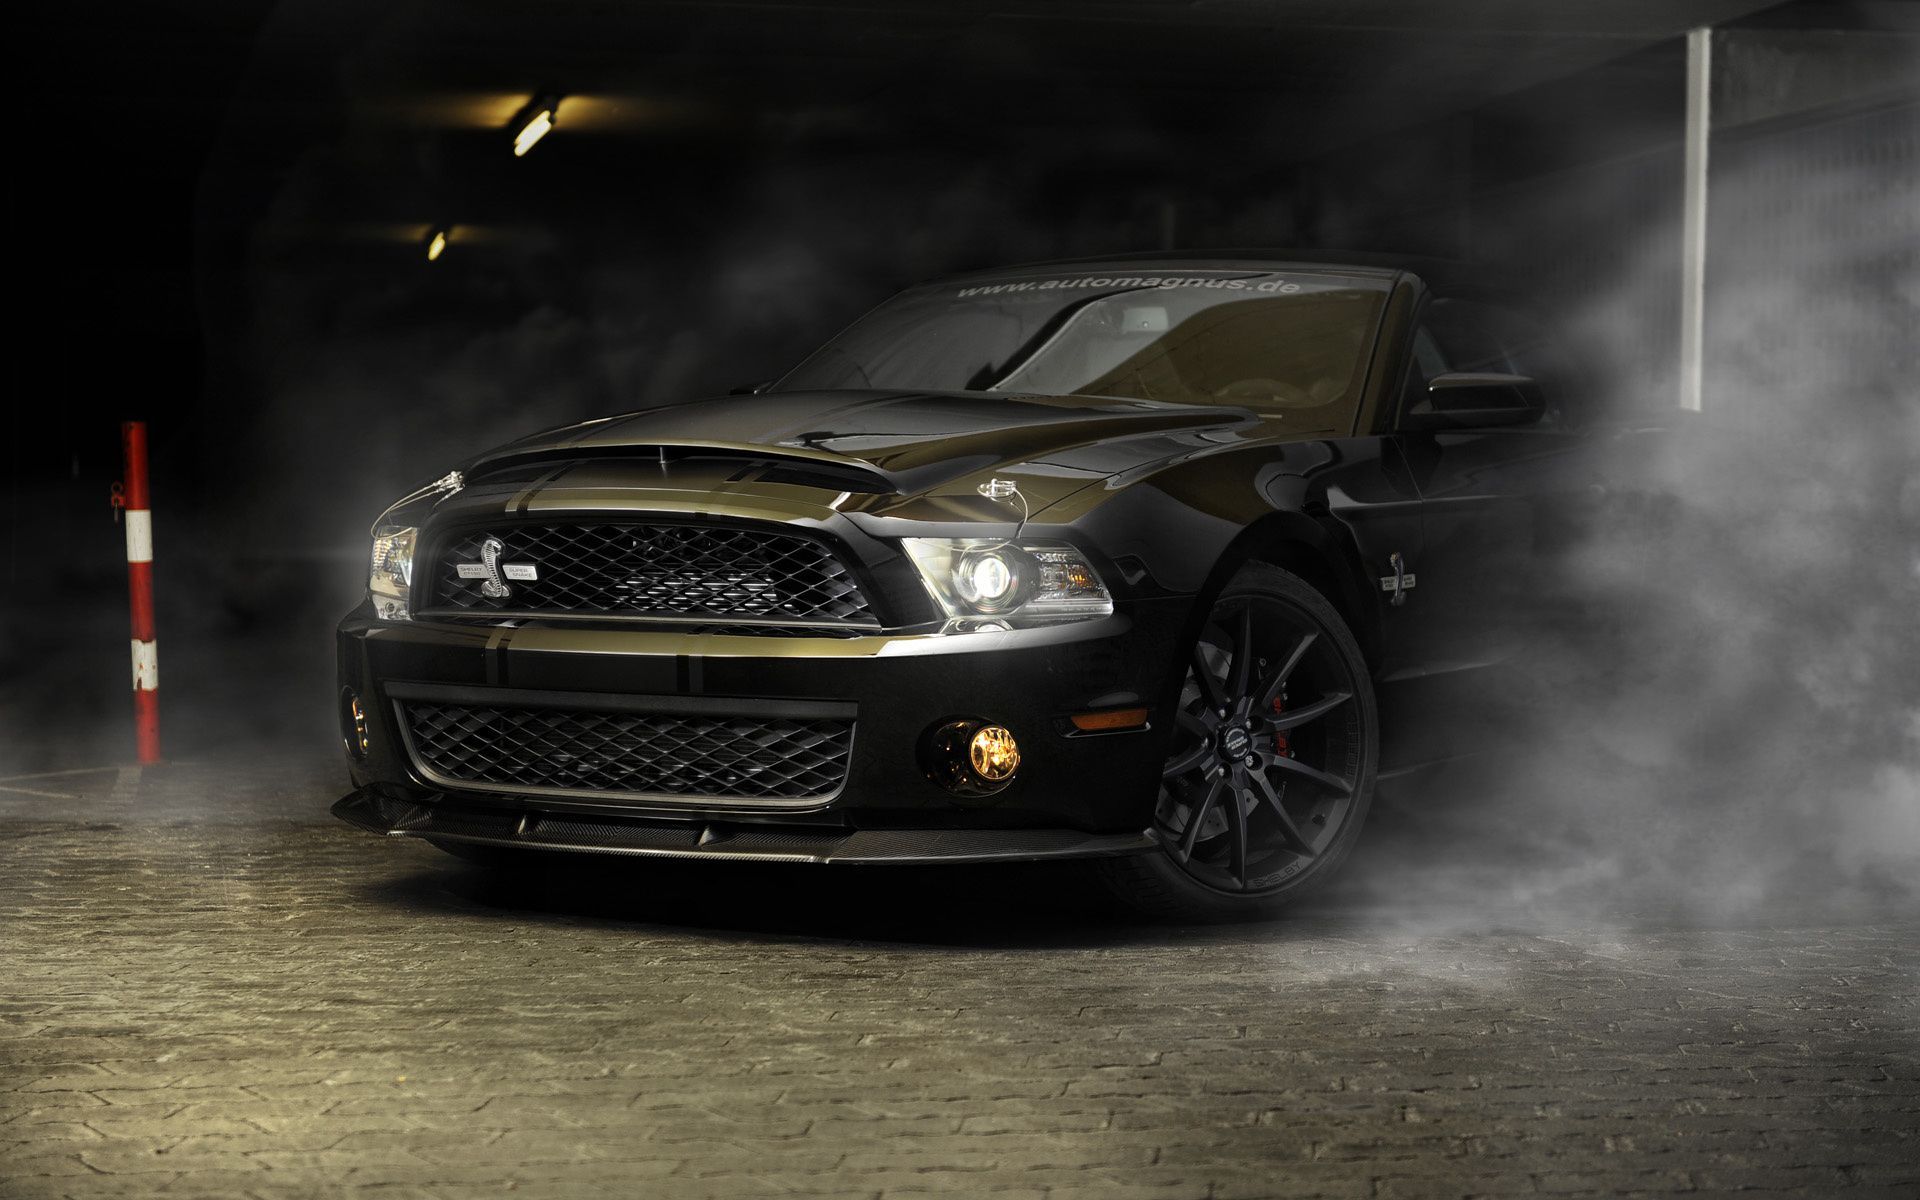 Mustang Wallpapers - Full HD wallpaper search pick up & cars